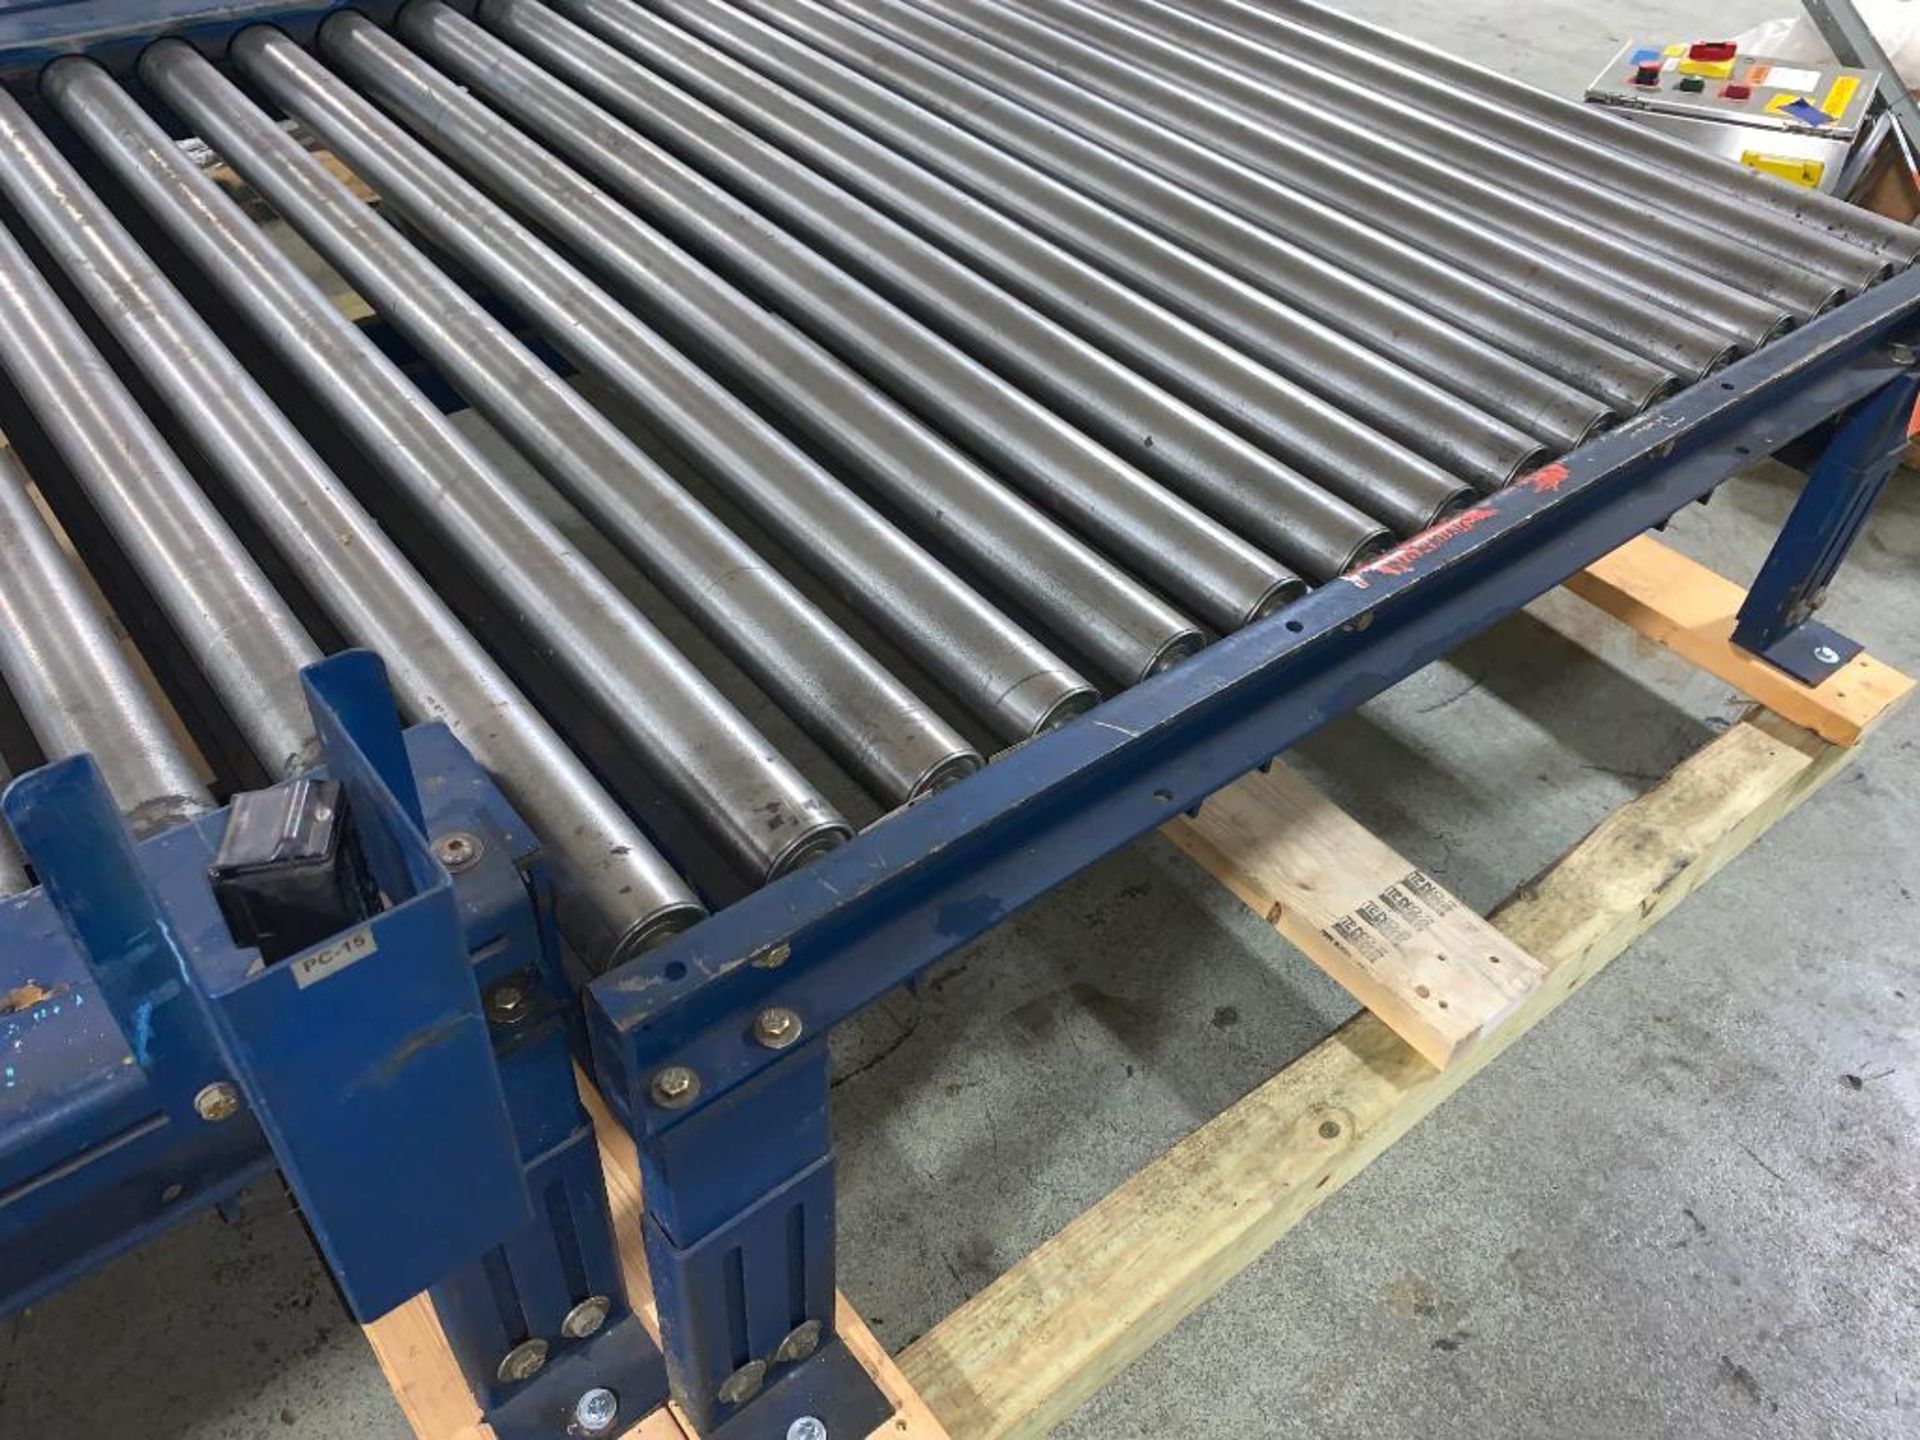 (6) skids of Lantech full pallet conveyor including turntable section - Located in Tifton, GA - Image 9 of 19